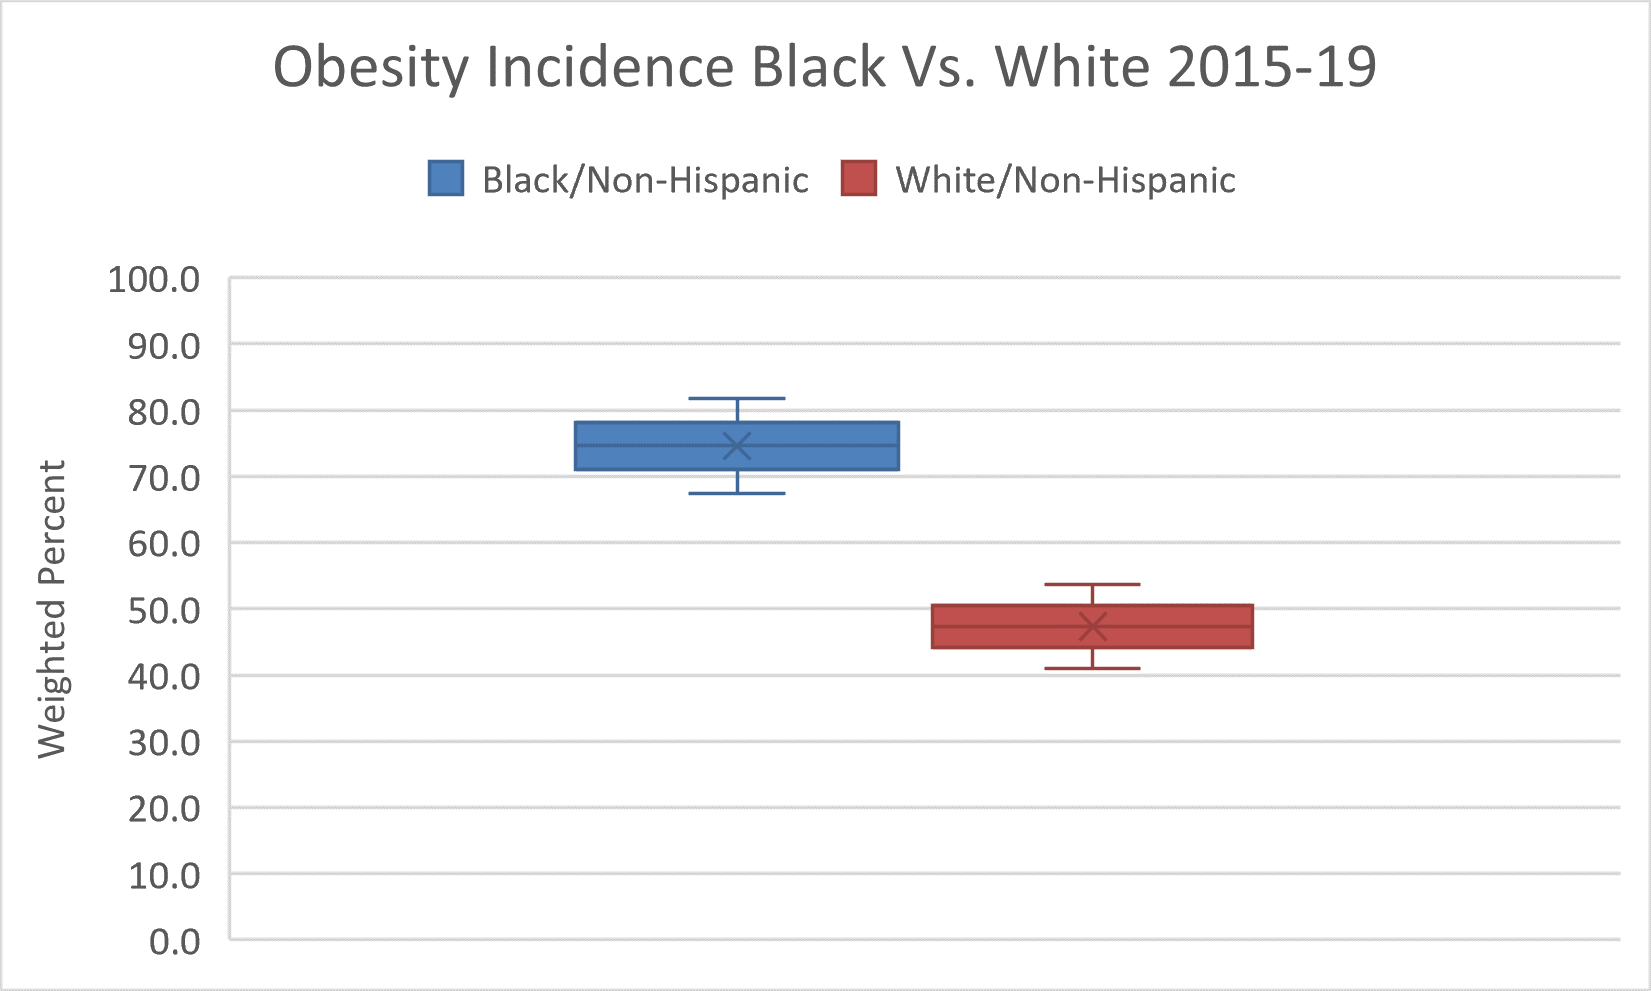 Box and whisker plot showing that non-Hispanic Blacks have higher incidence rates of obesity than non-Hispanic Whites from 2015-2019.